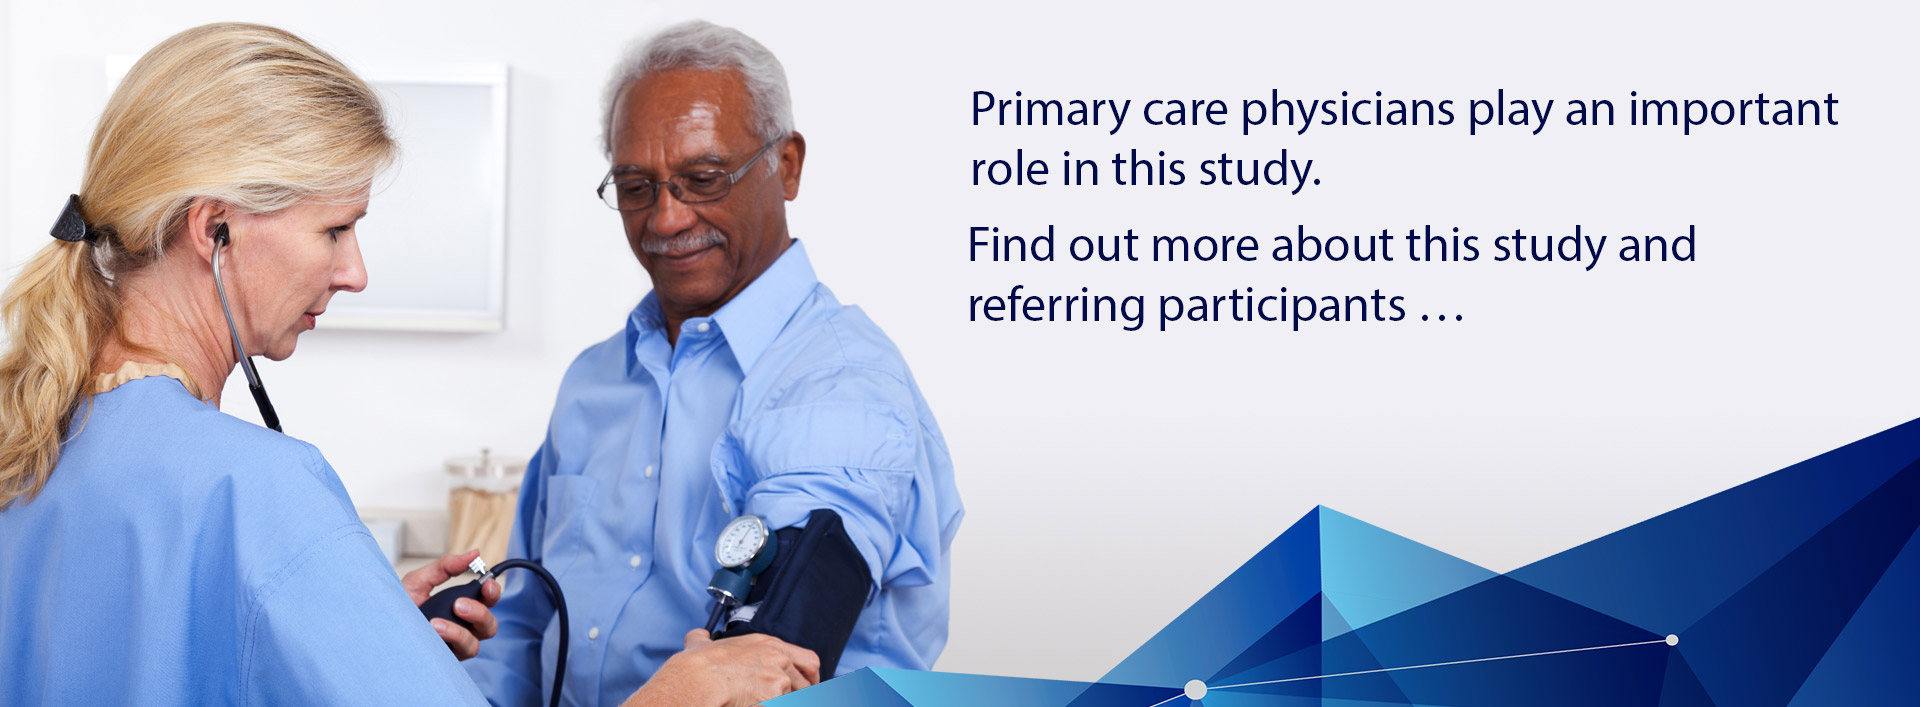 Primary care physicians play an important role in this study. Find out more about this study and referring participants …